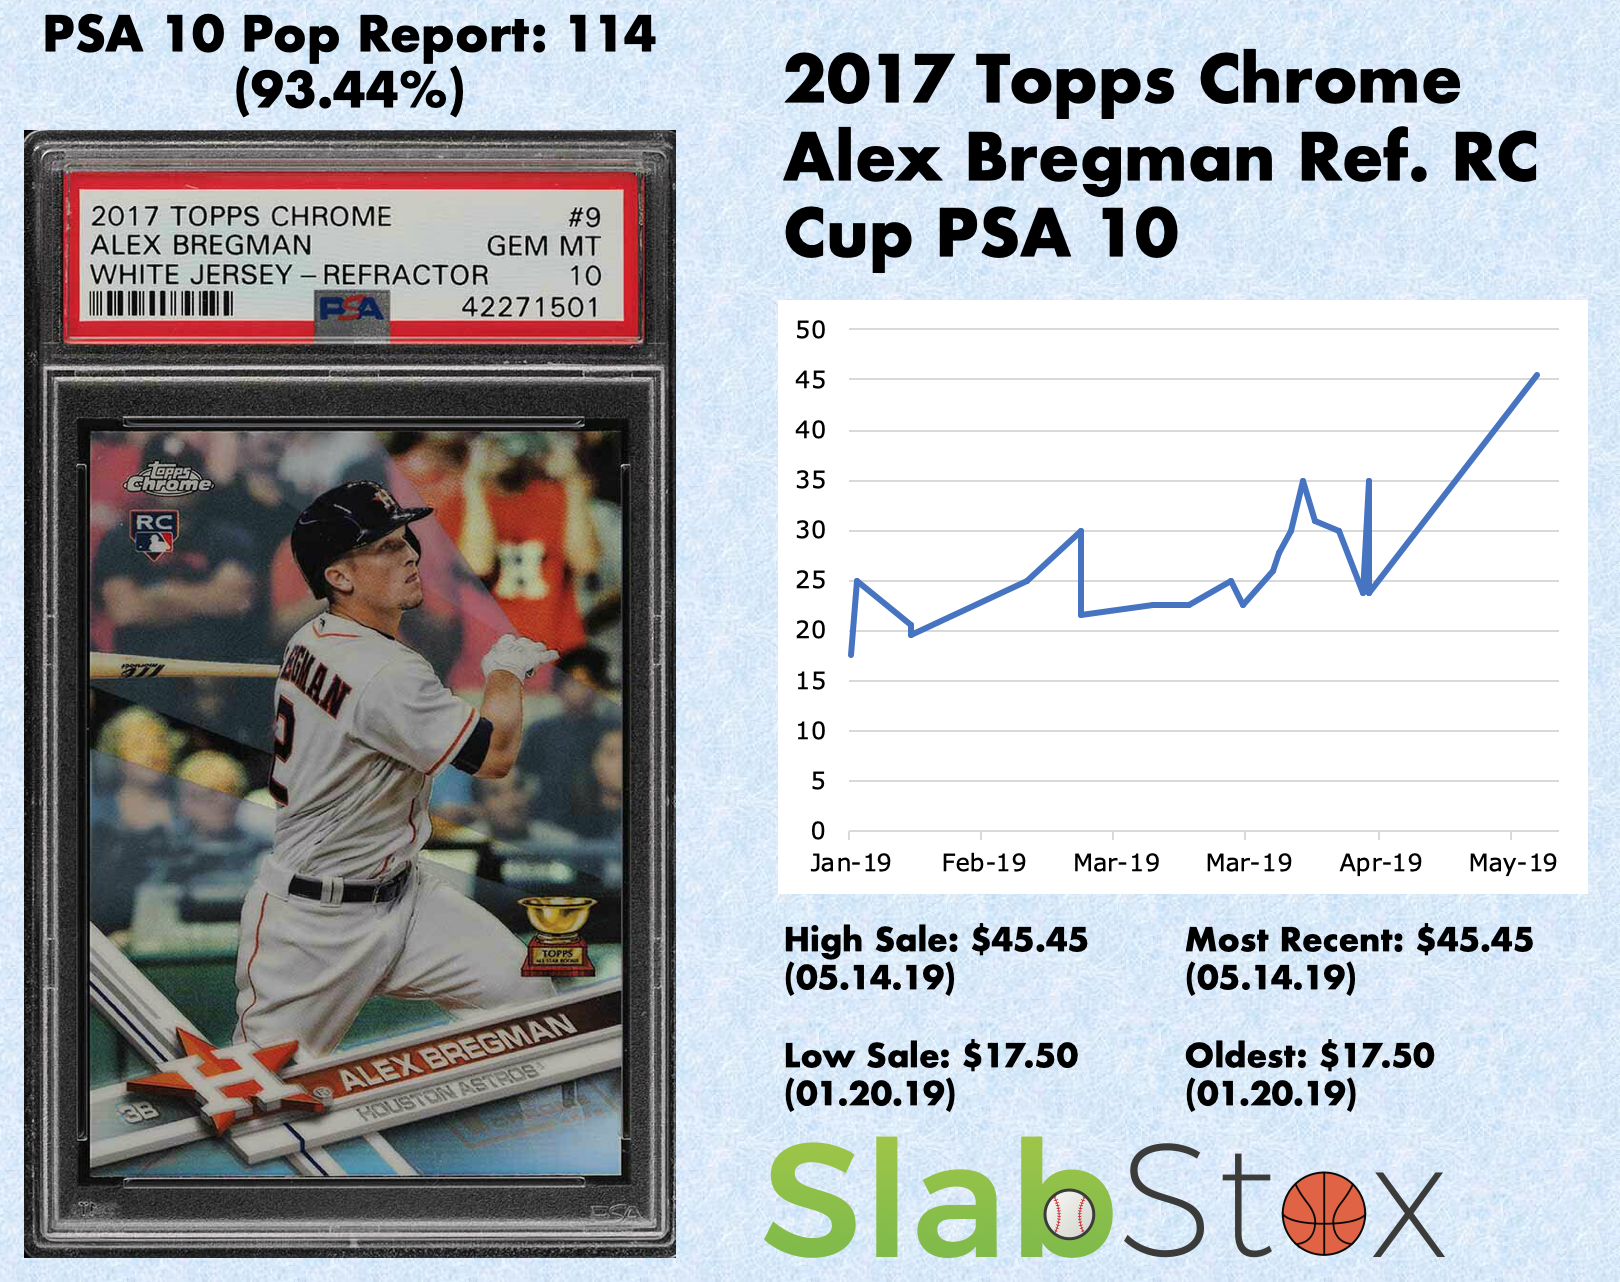 SlabStox infographic for 2017 Topps Chrome Alex Bregman Ref. RC CUp PSA 10 sports trading card